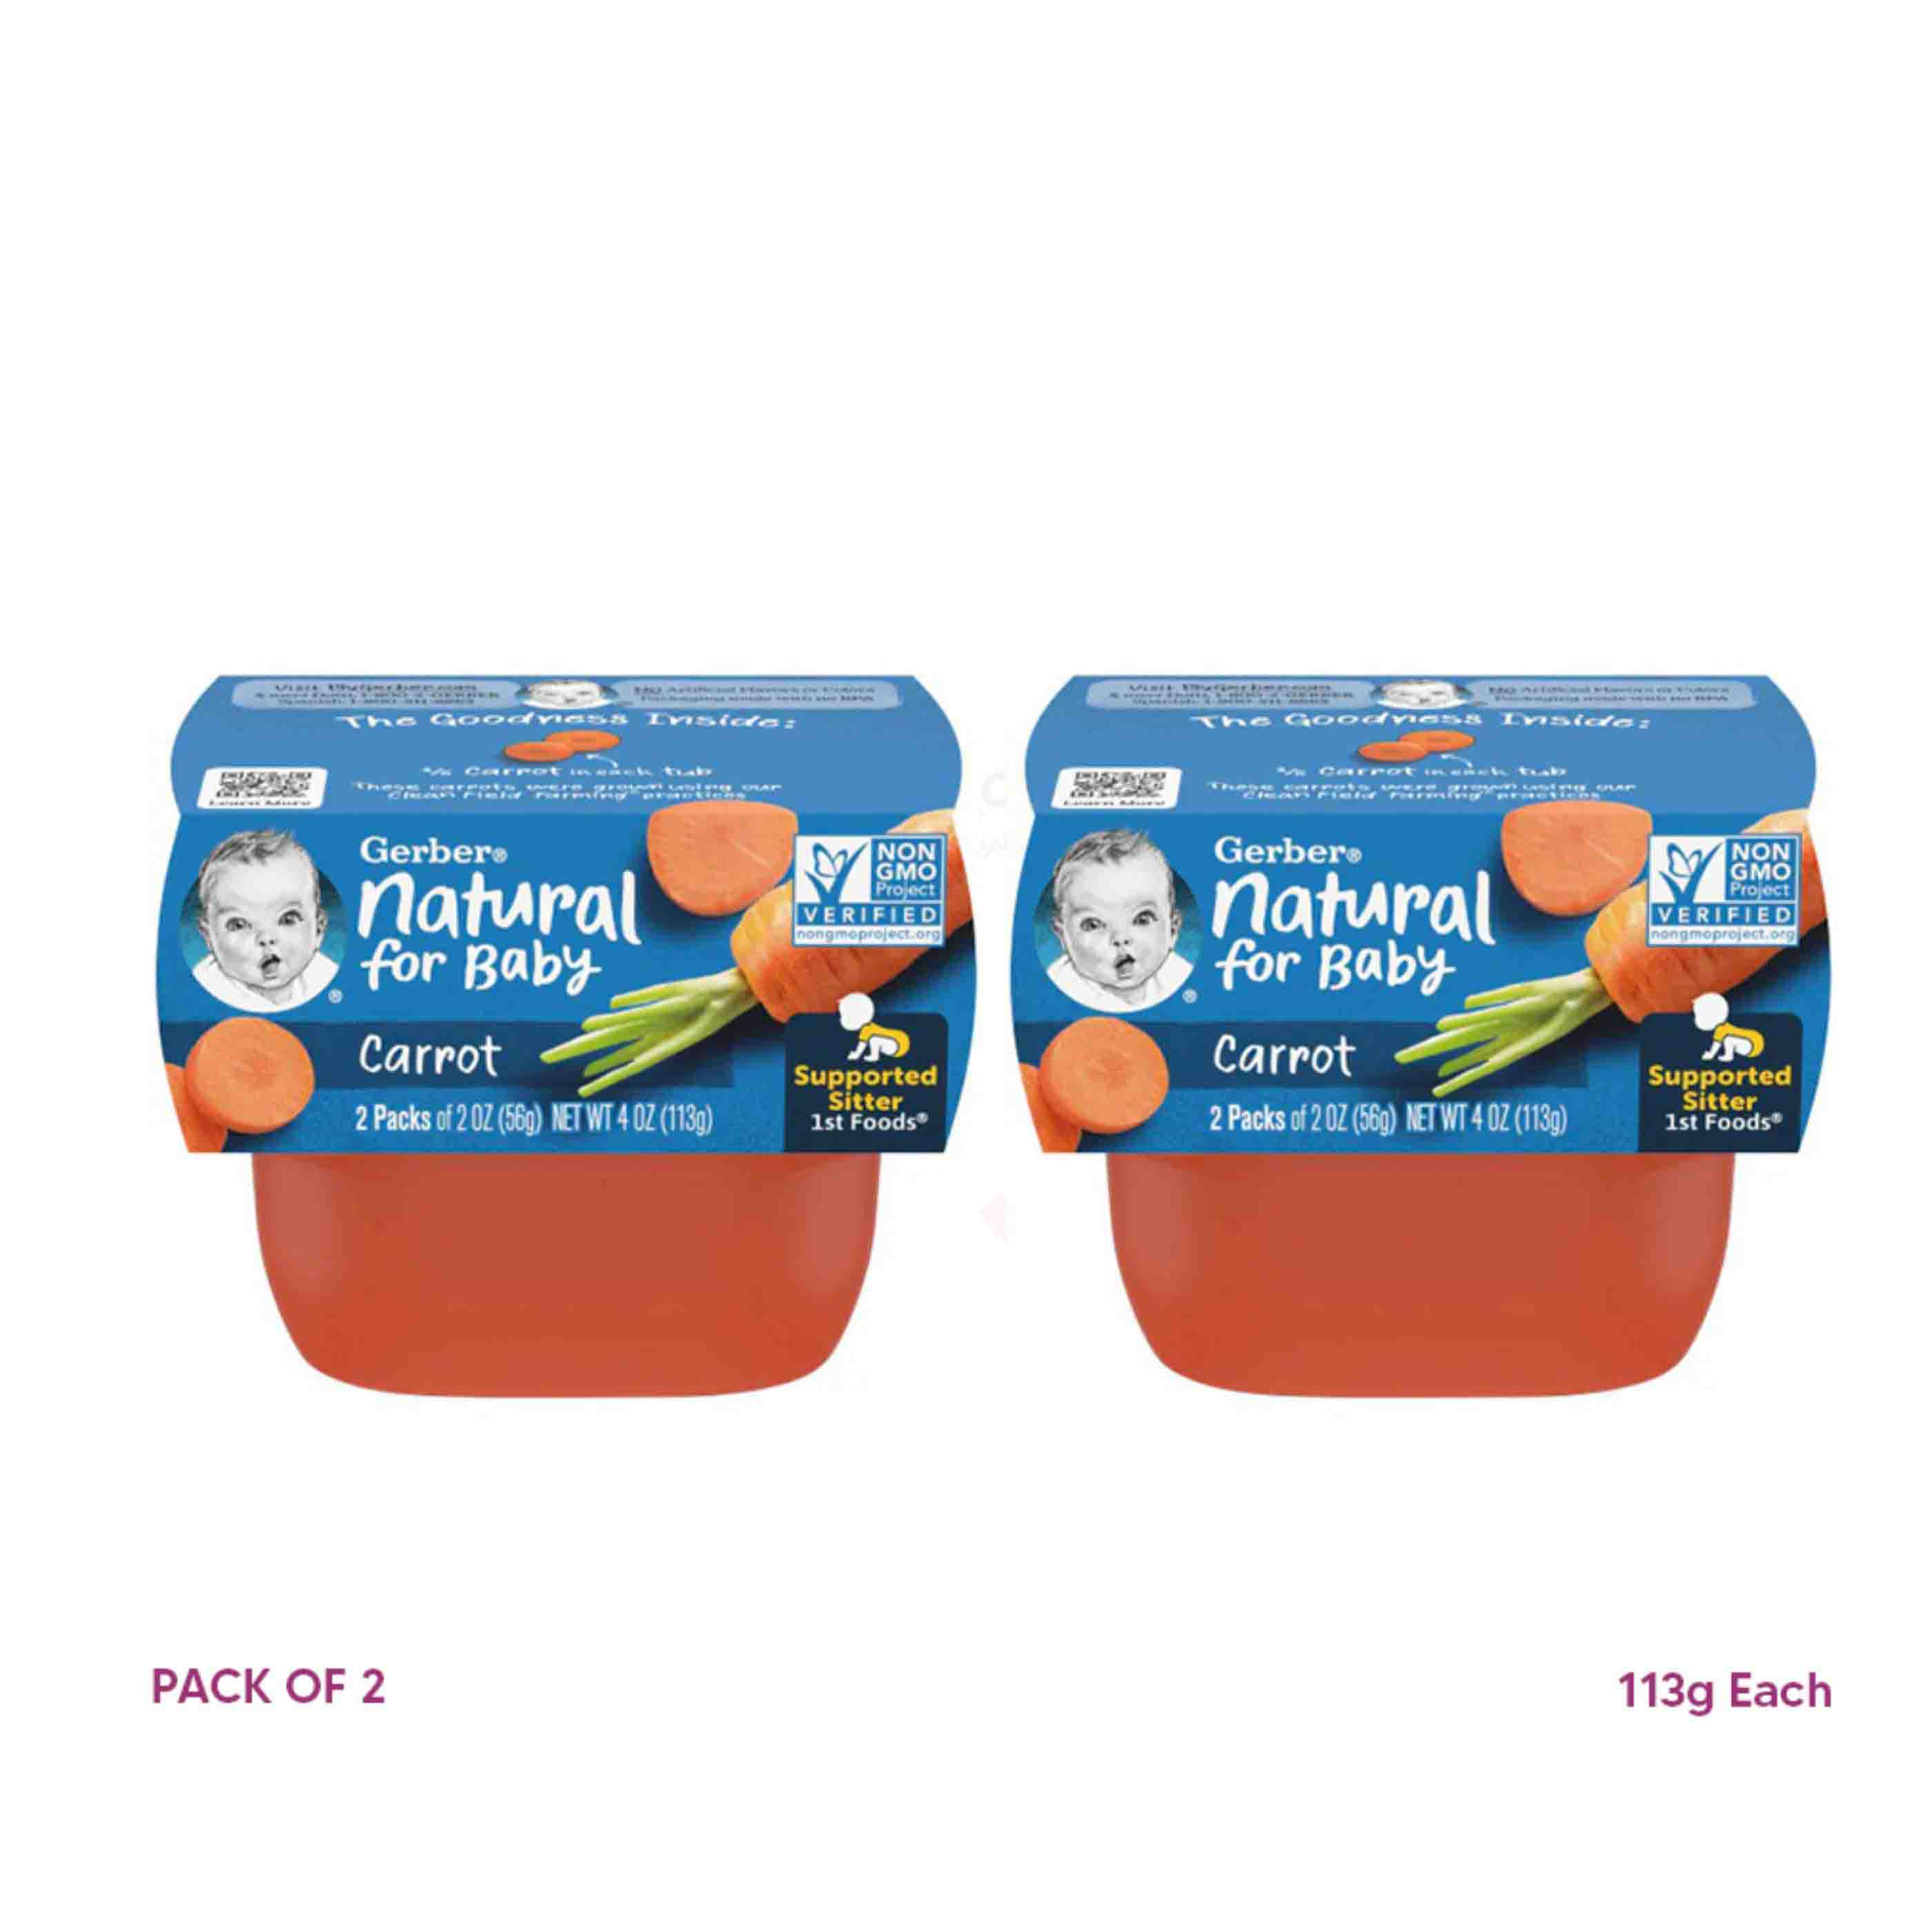 GERBER Puree 1st Foods Carrot Flavored Snack For Babies, 2 Pack (56g each) - Supported Sitter - Pack of 2